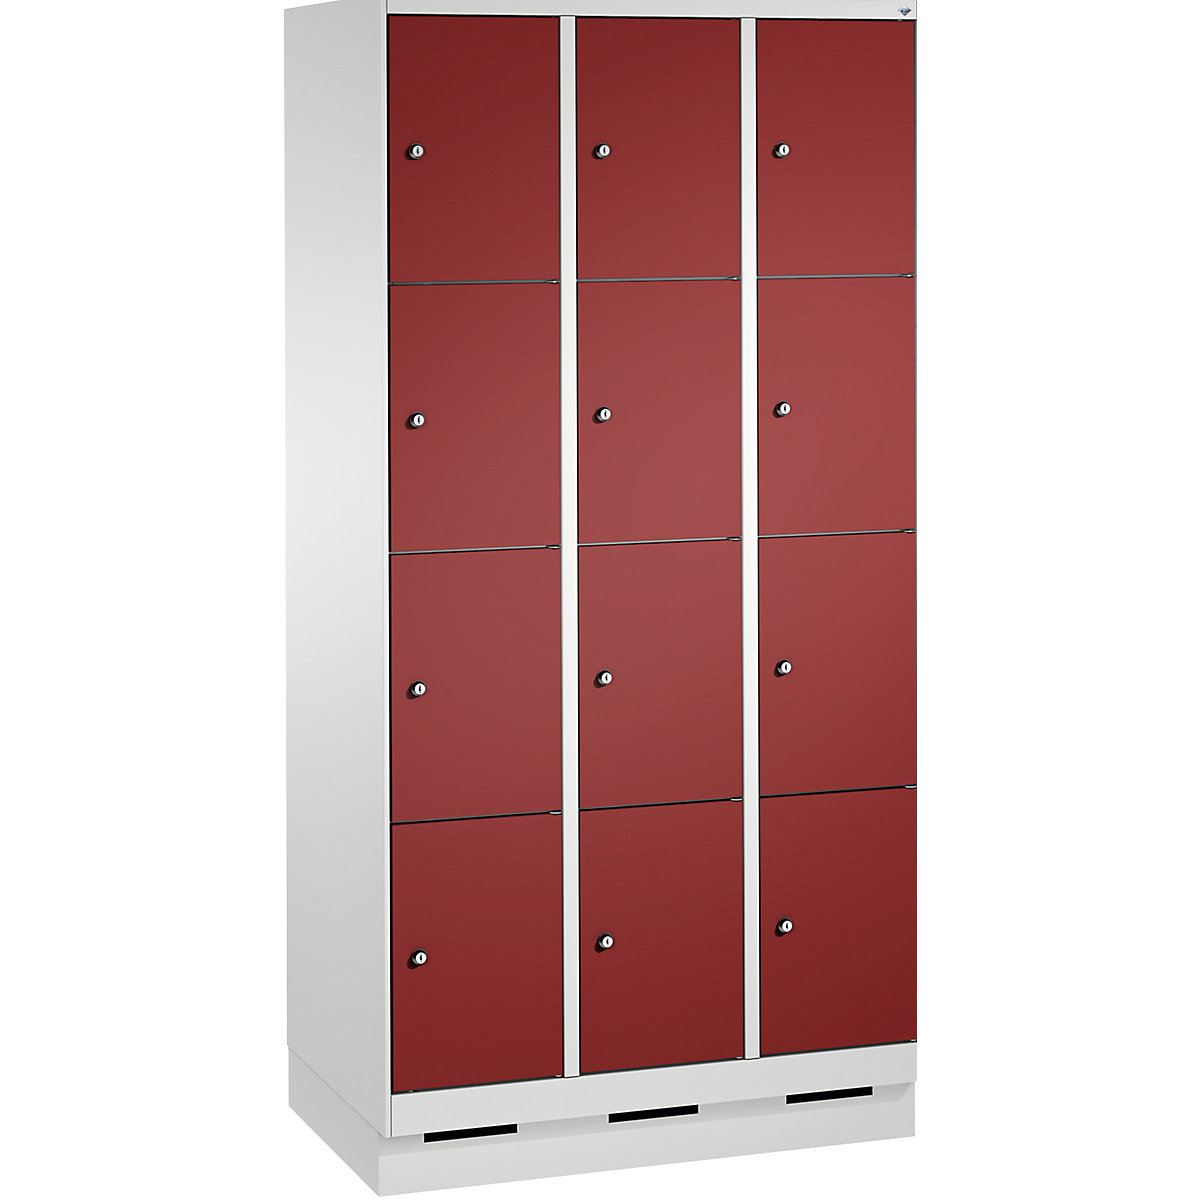 EVOLO locker unit, with plinth – C+P, 3 compartments, 4 shelf compartments each, compartment width 300 mm, light grey / ruby red-12